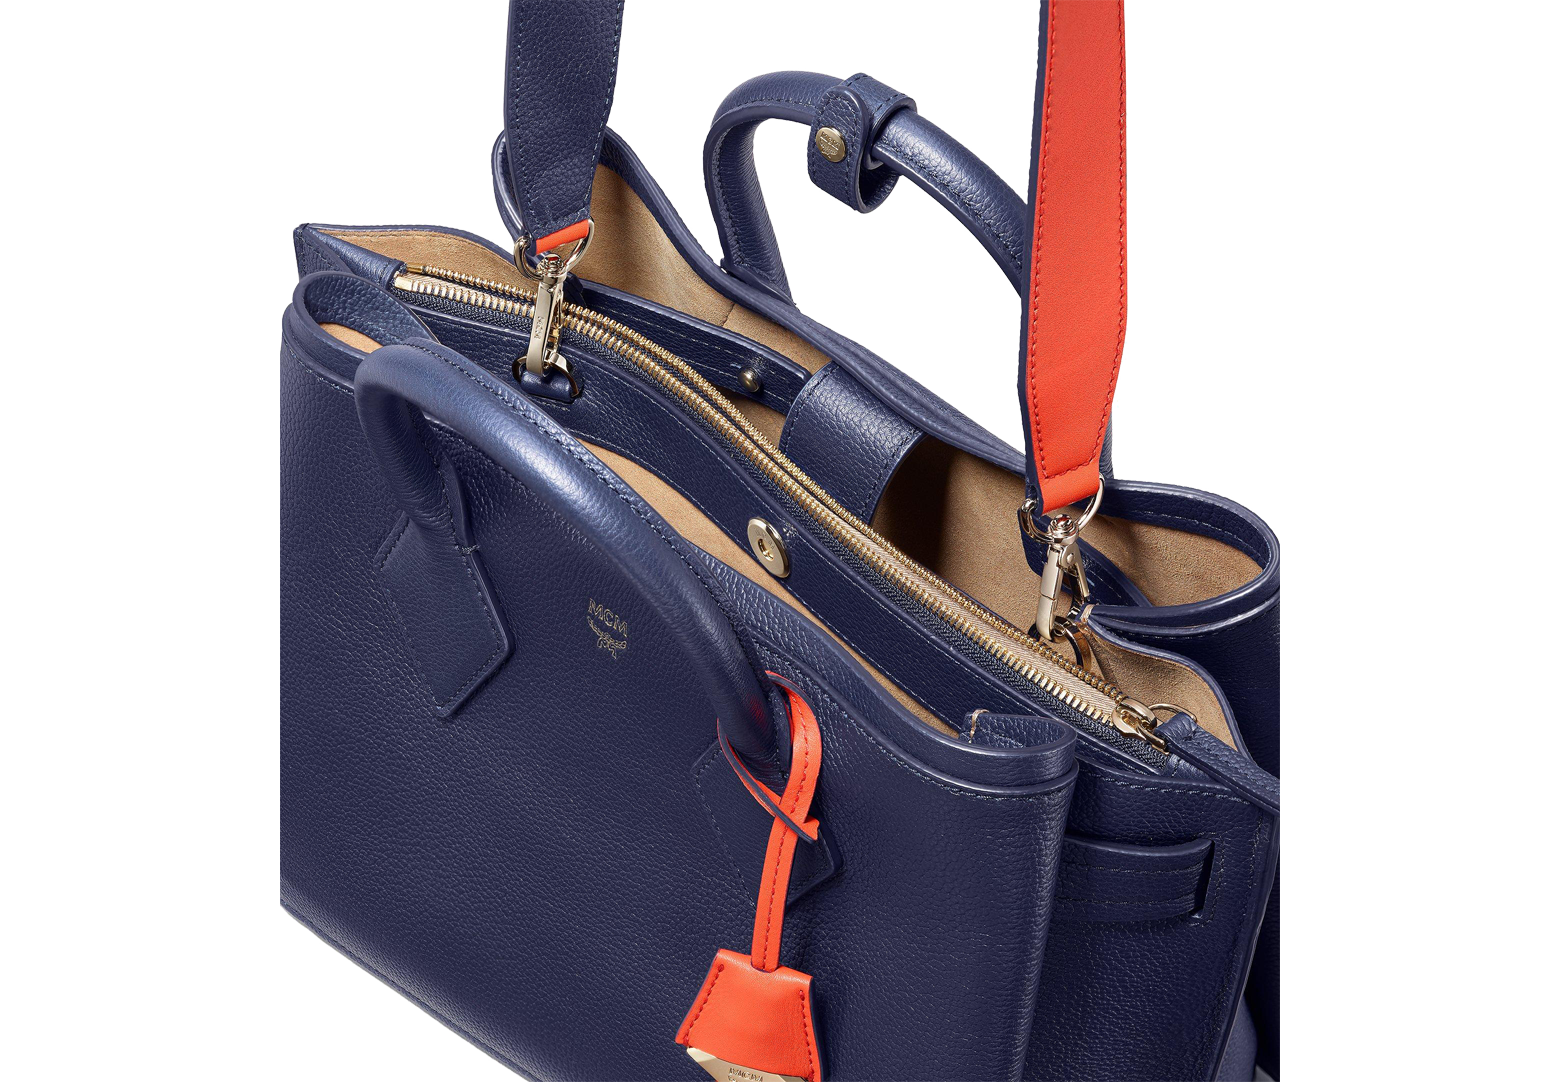 Mcm Medium Neo Milla Park Avenue Leather Tote In Navy Blue/gold